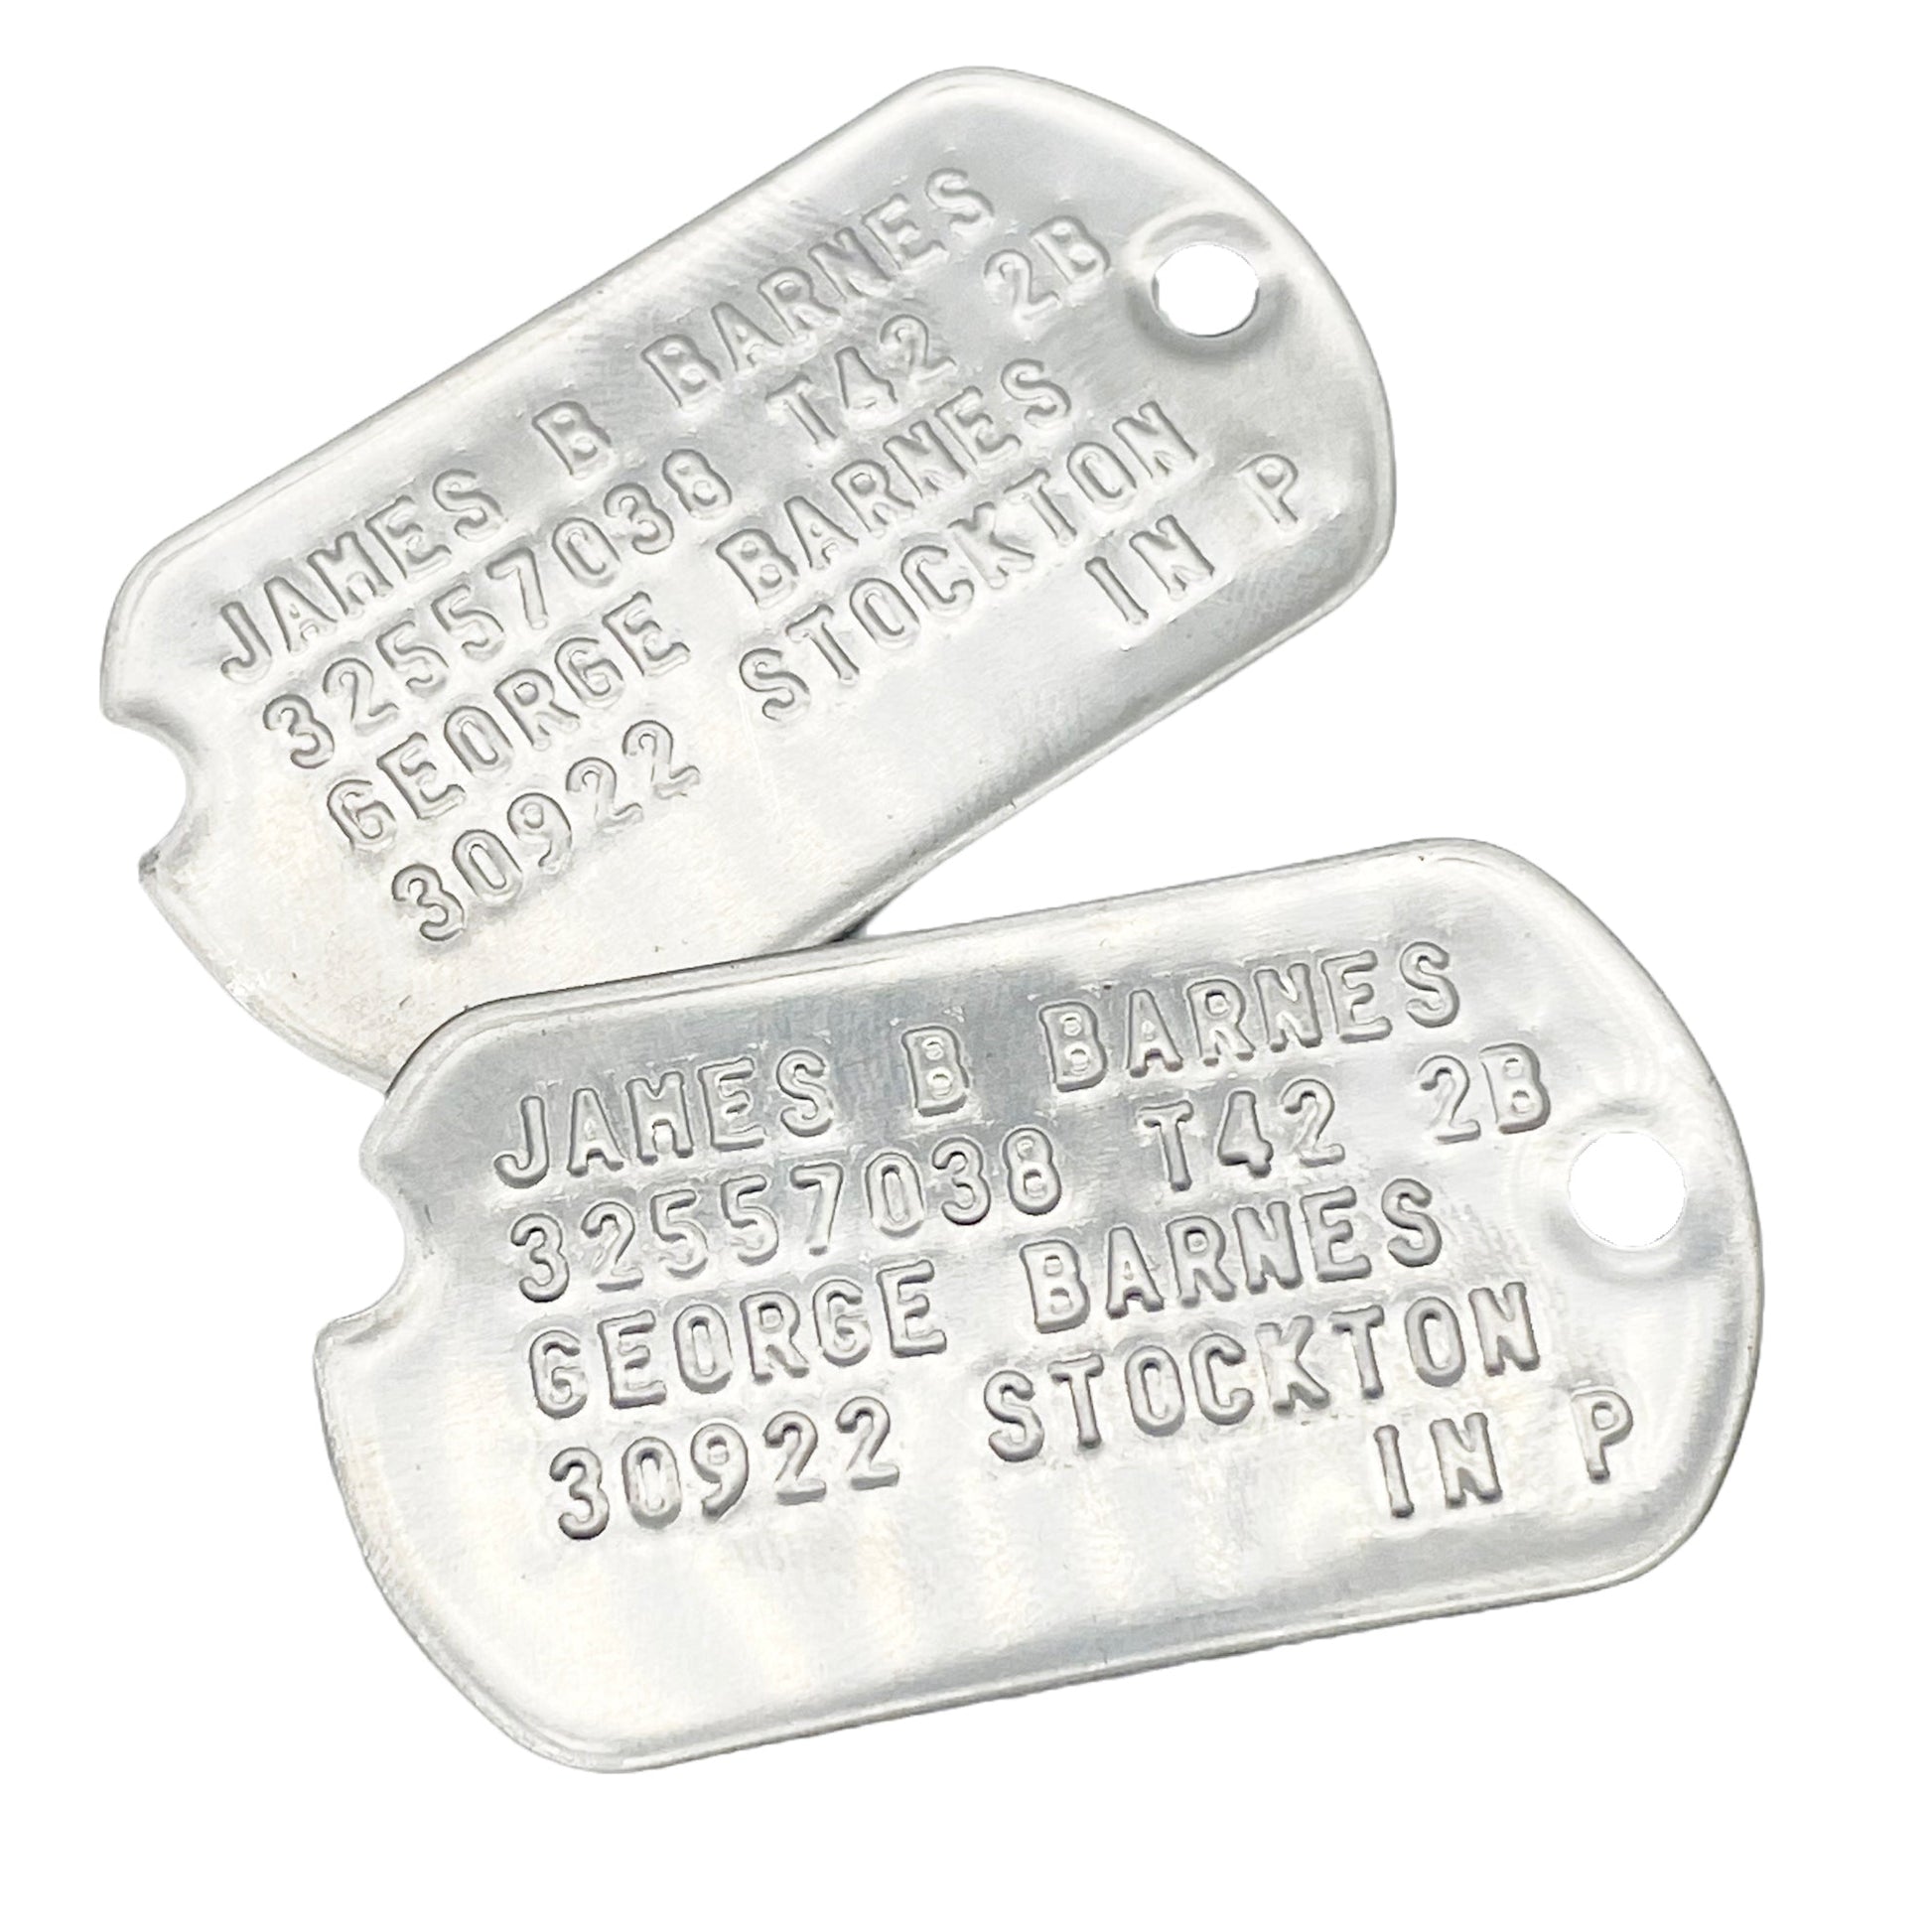 Notched WWII Military Stainless Steel Dog Tags